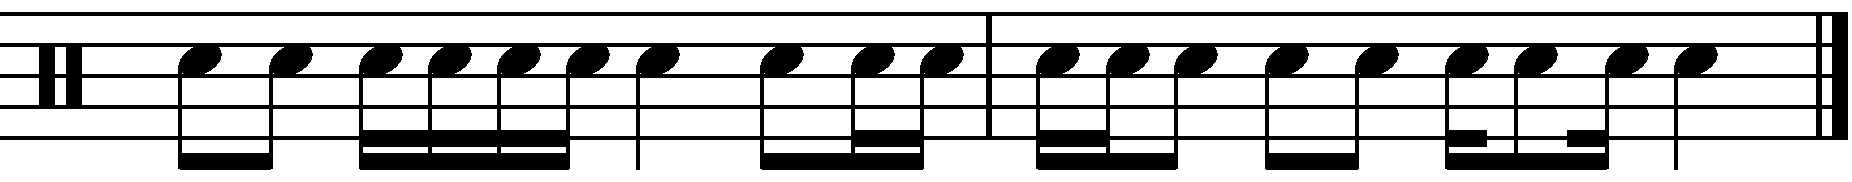 An example snare drum rhythm.